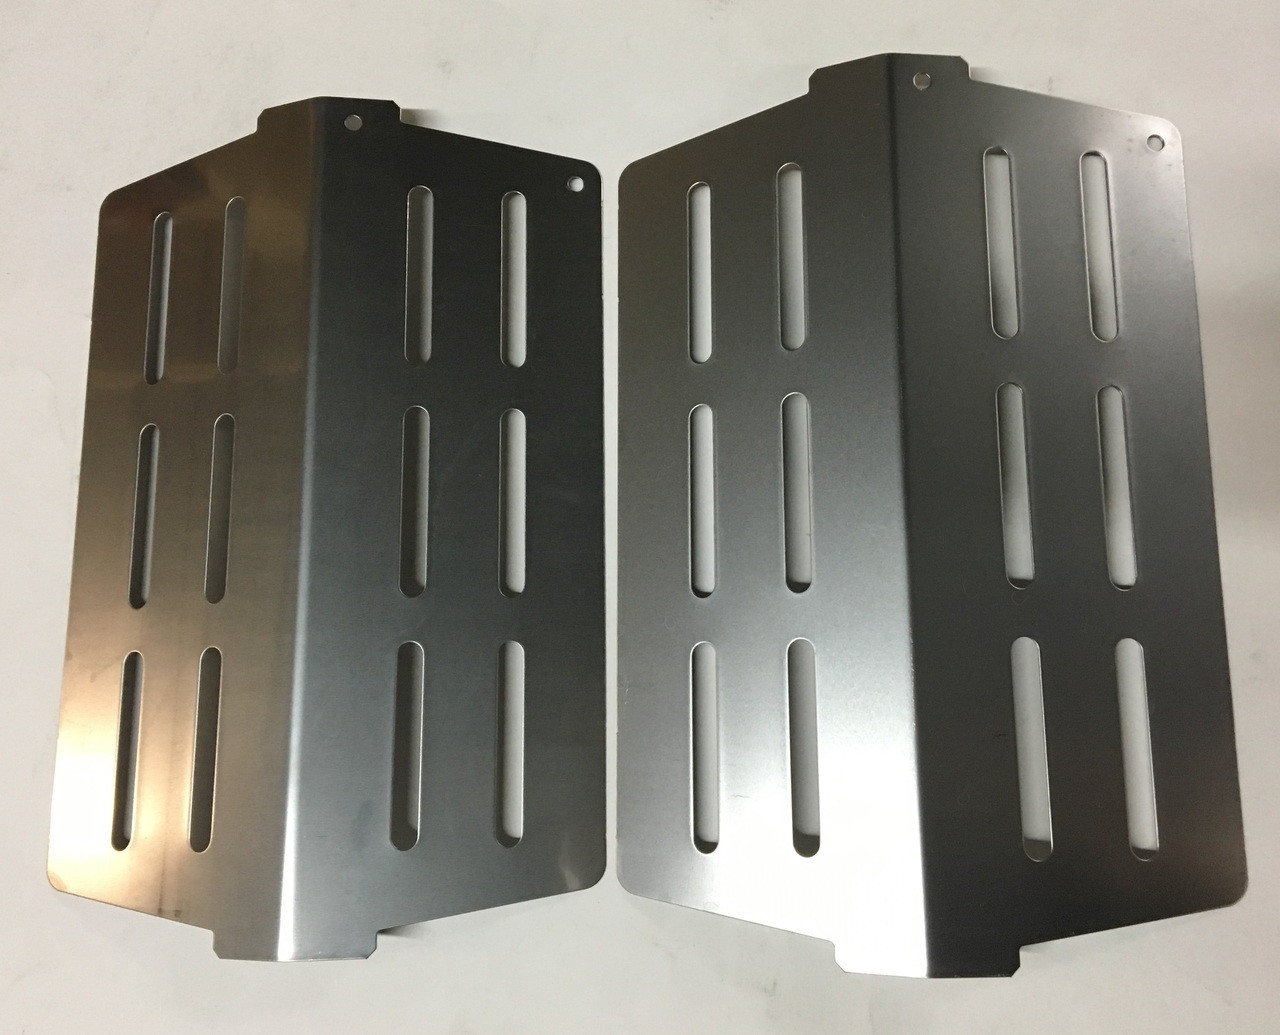 2011 & Newer Model SPG622 2011-2016 Gas Grills Compared to The Weber 7622 62756 65505 Heat Deflector Genesis EP/S Hongso 13.25 Heat Deflector Replacement for Weber Genesis 300 310,320,330